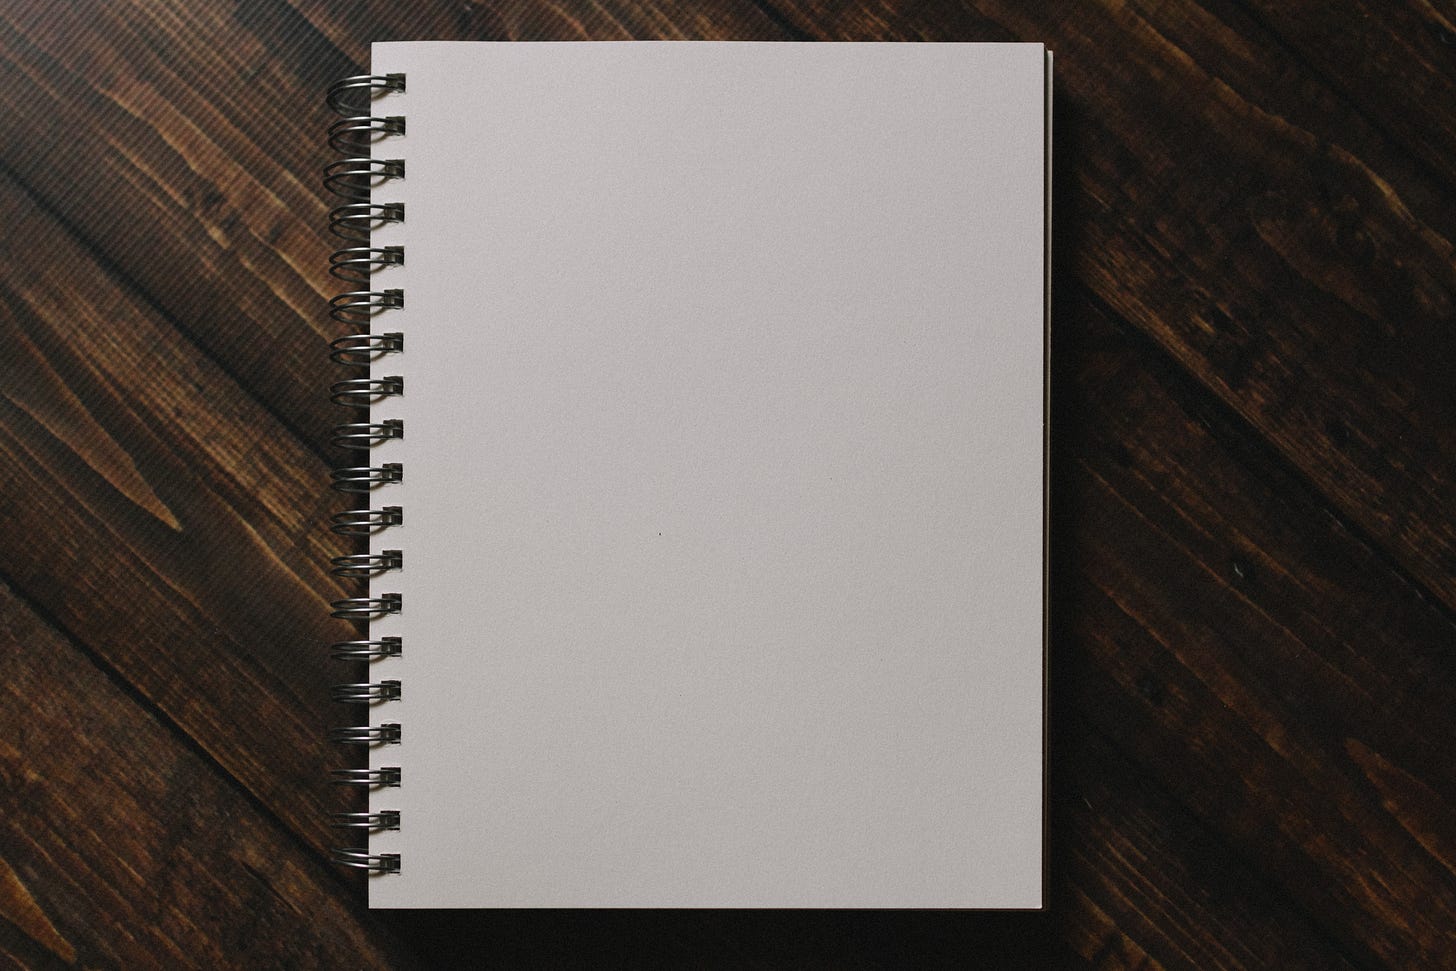 White notebook on brown wooden table.